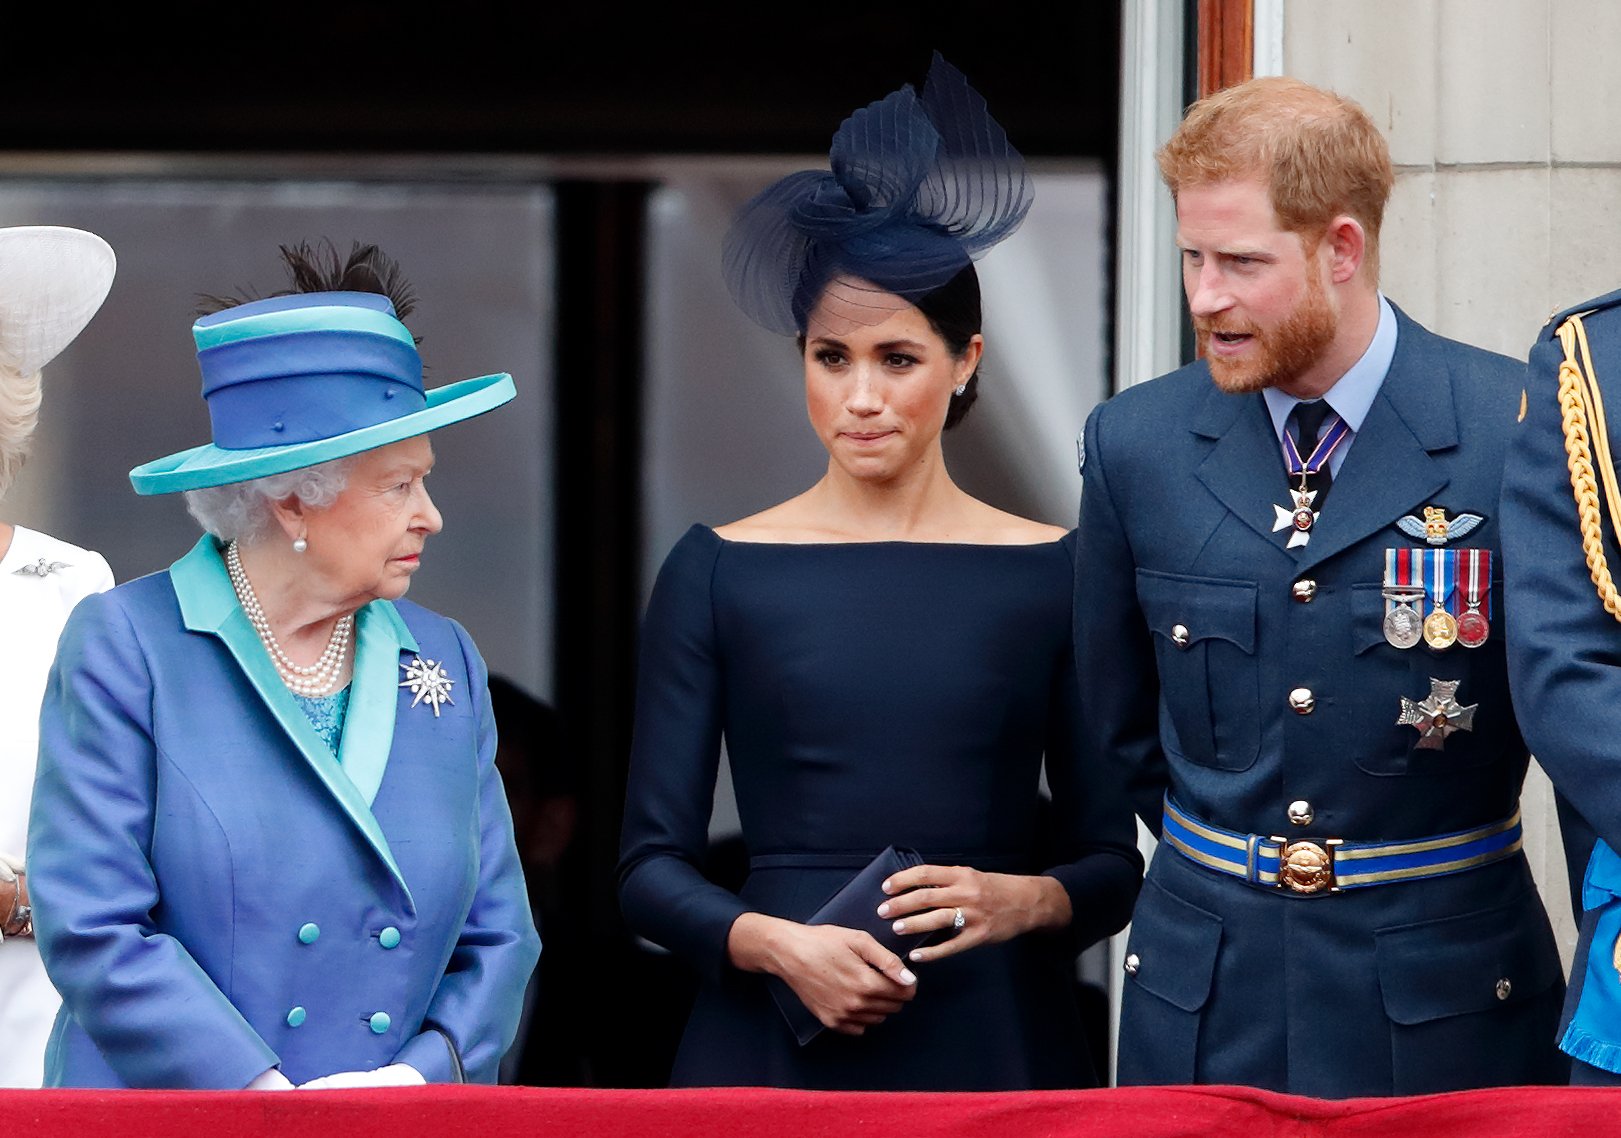 Queen Elizabeth II, Duchess Meghan, and Prince Harry at the centenary of the Royal Air Force on July 10, 2018, in London, England. | Source: Max Mumby/Indigo/Getty Images